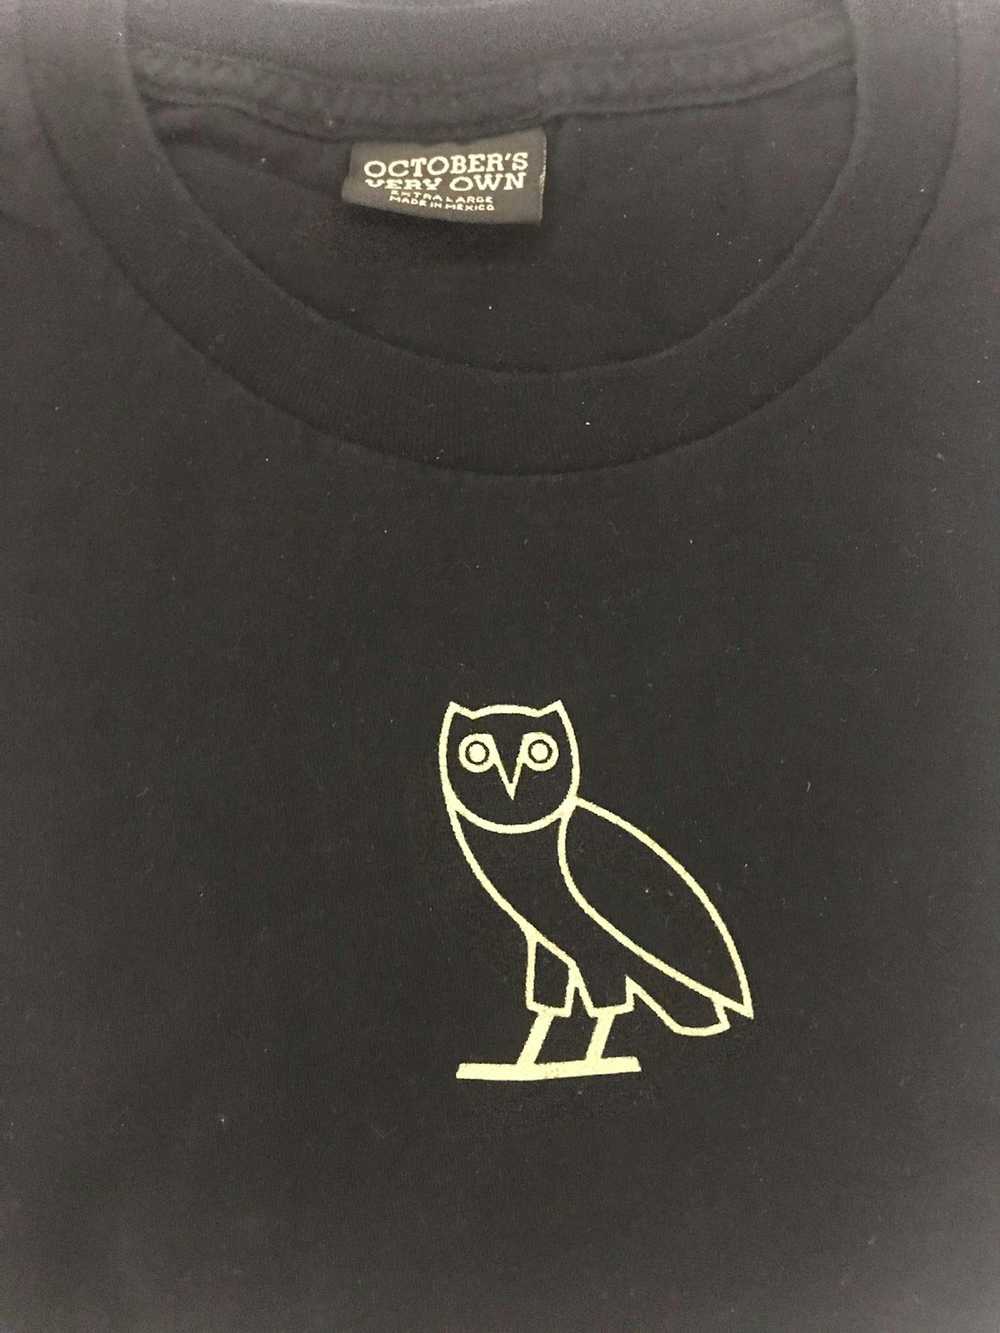 Octobers Very Own Ovo October very own Drake owl … - image 2